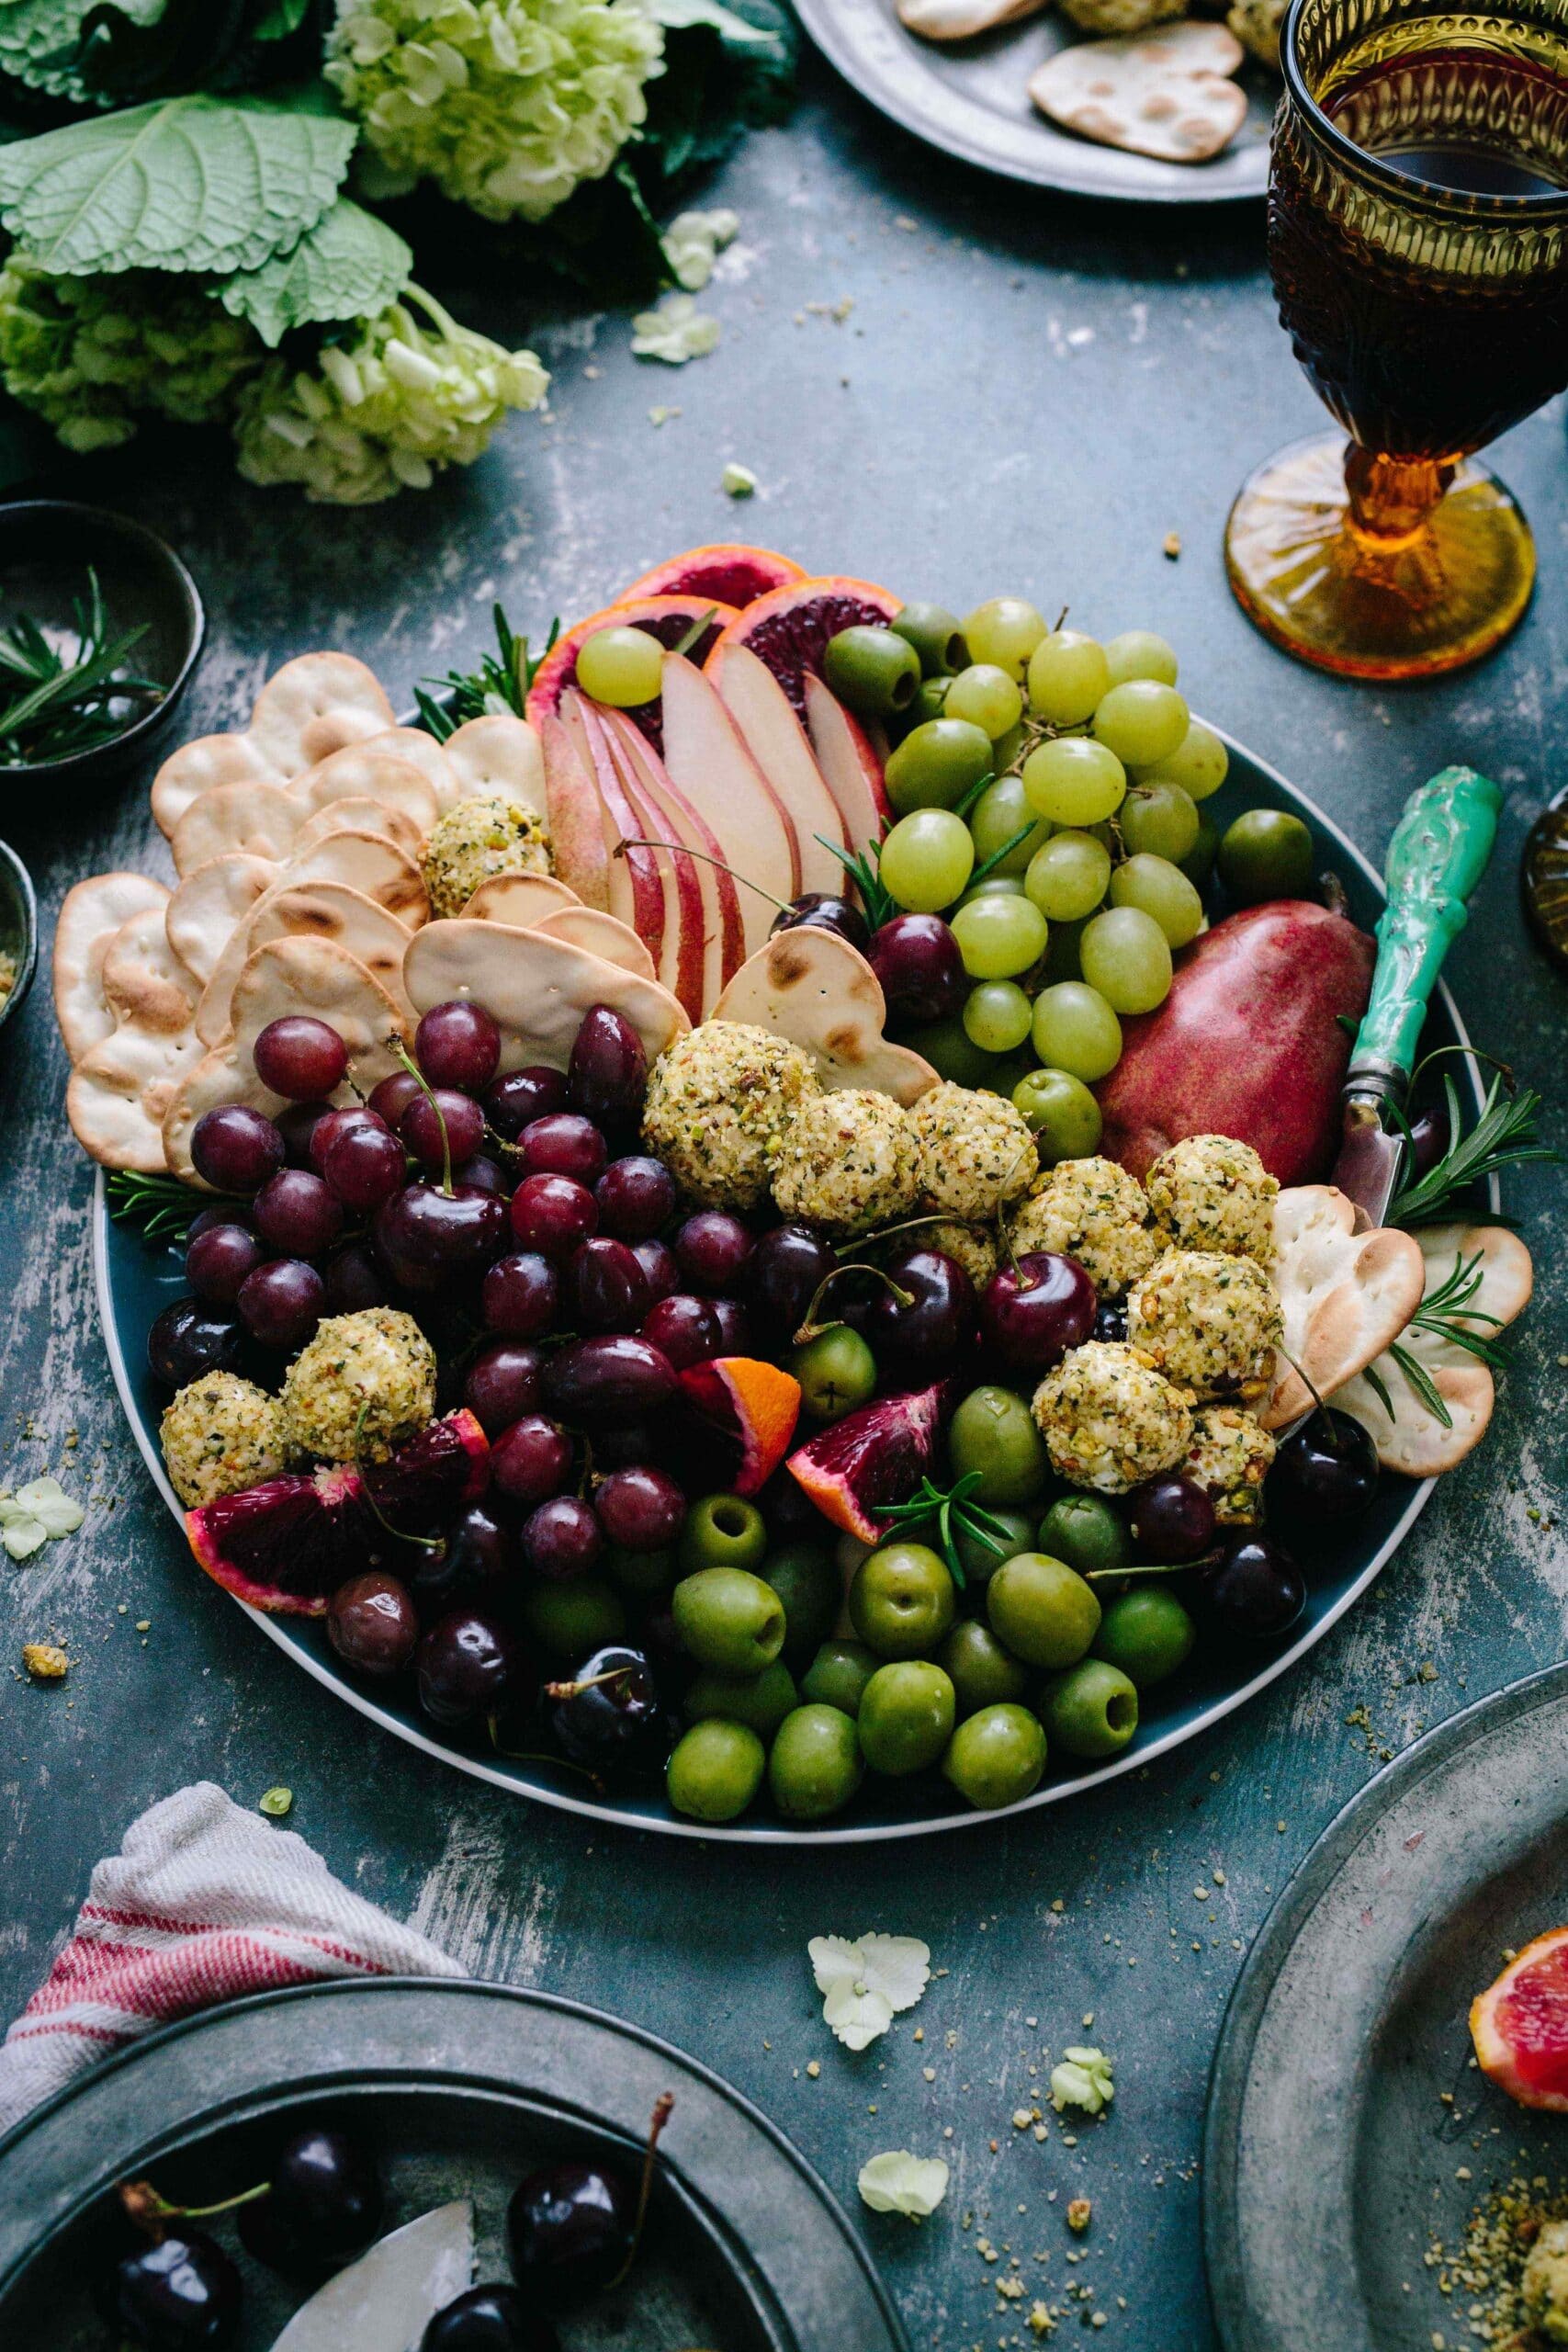 Olives, fruit and crackers on a silver tray